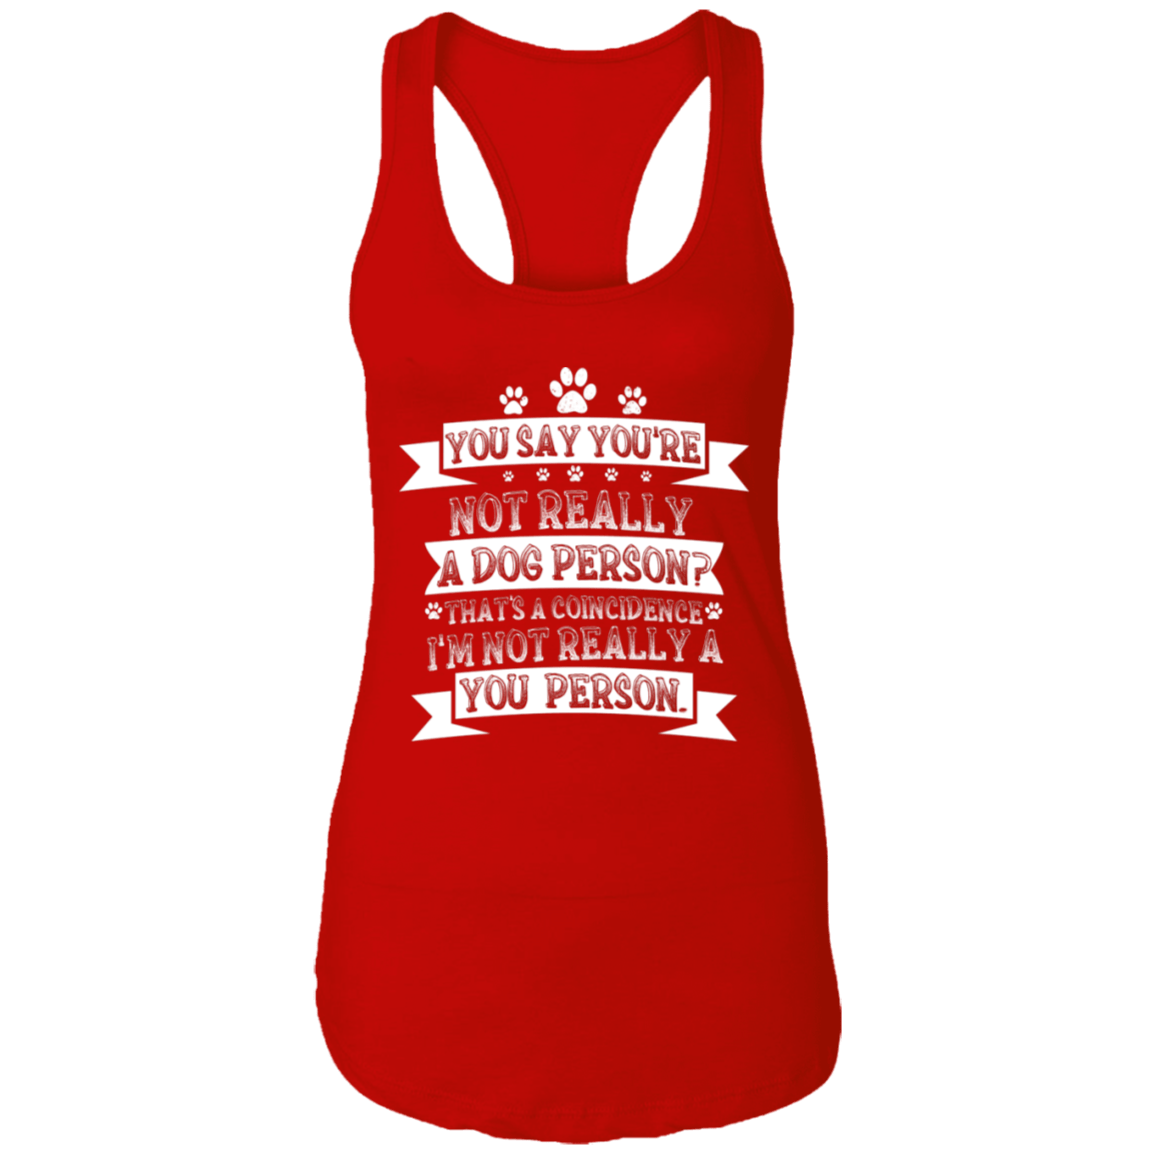 Not Really A You Person- Ladies Racer Back Tank.